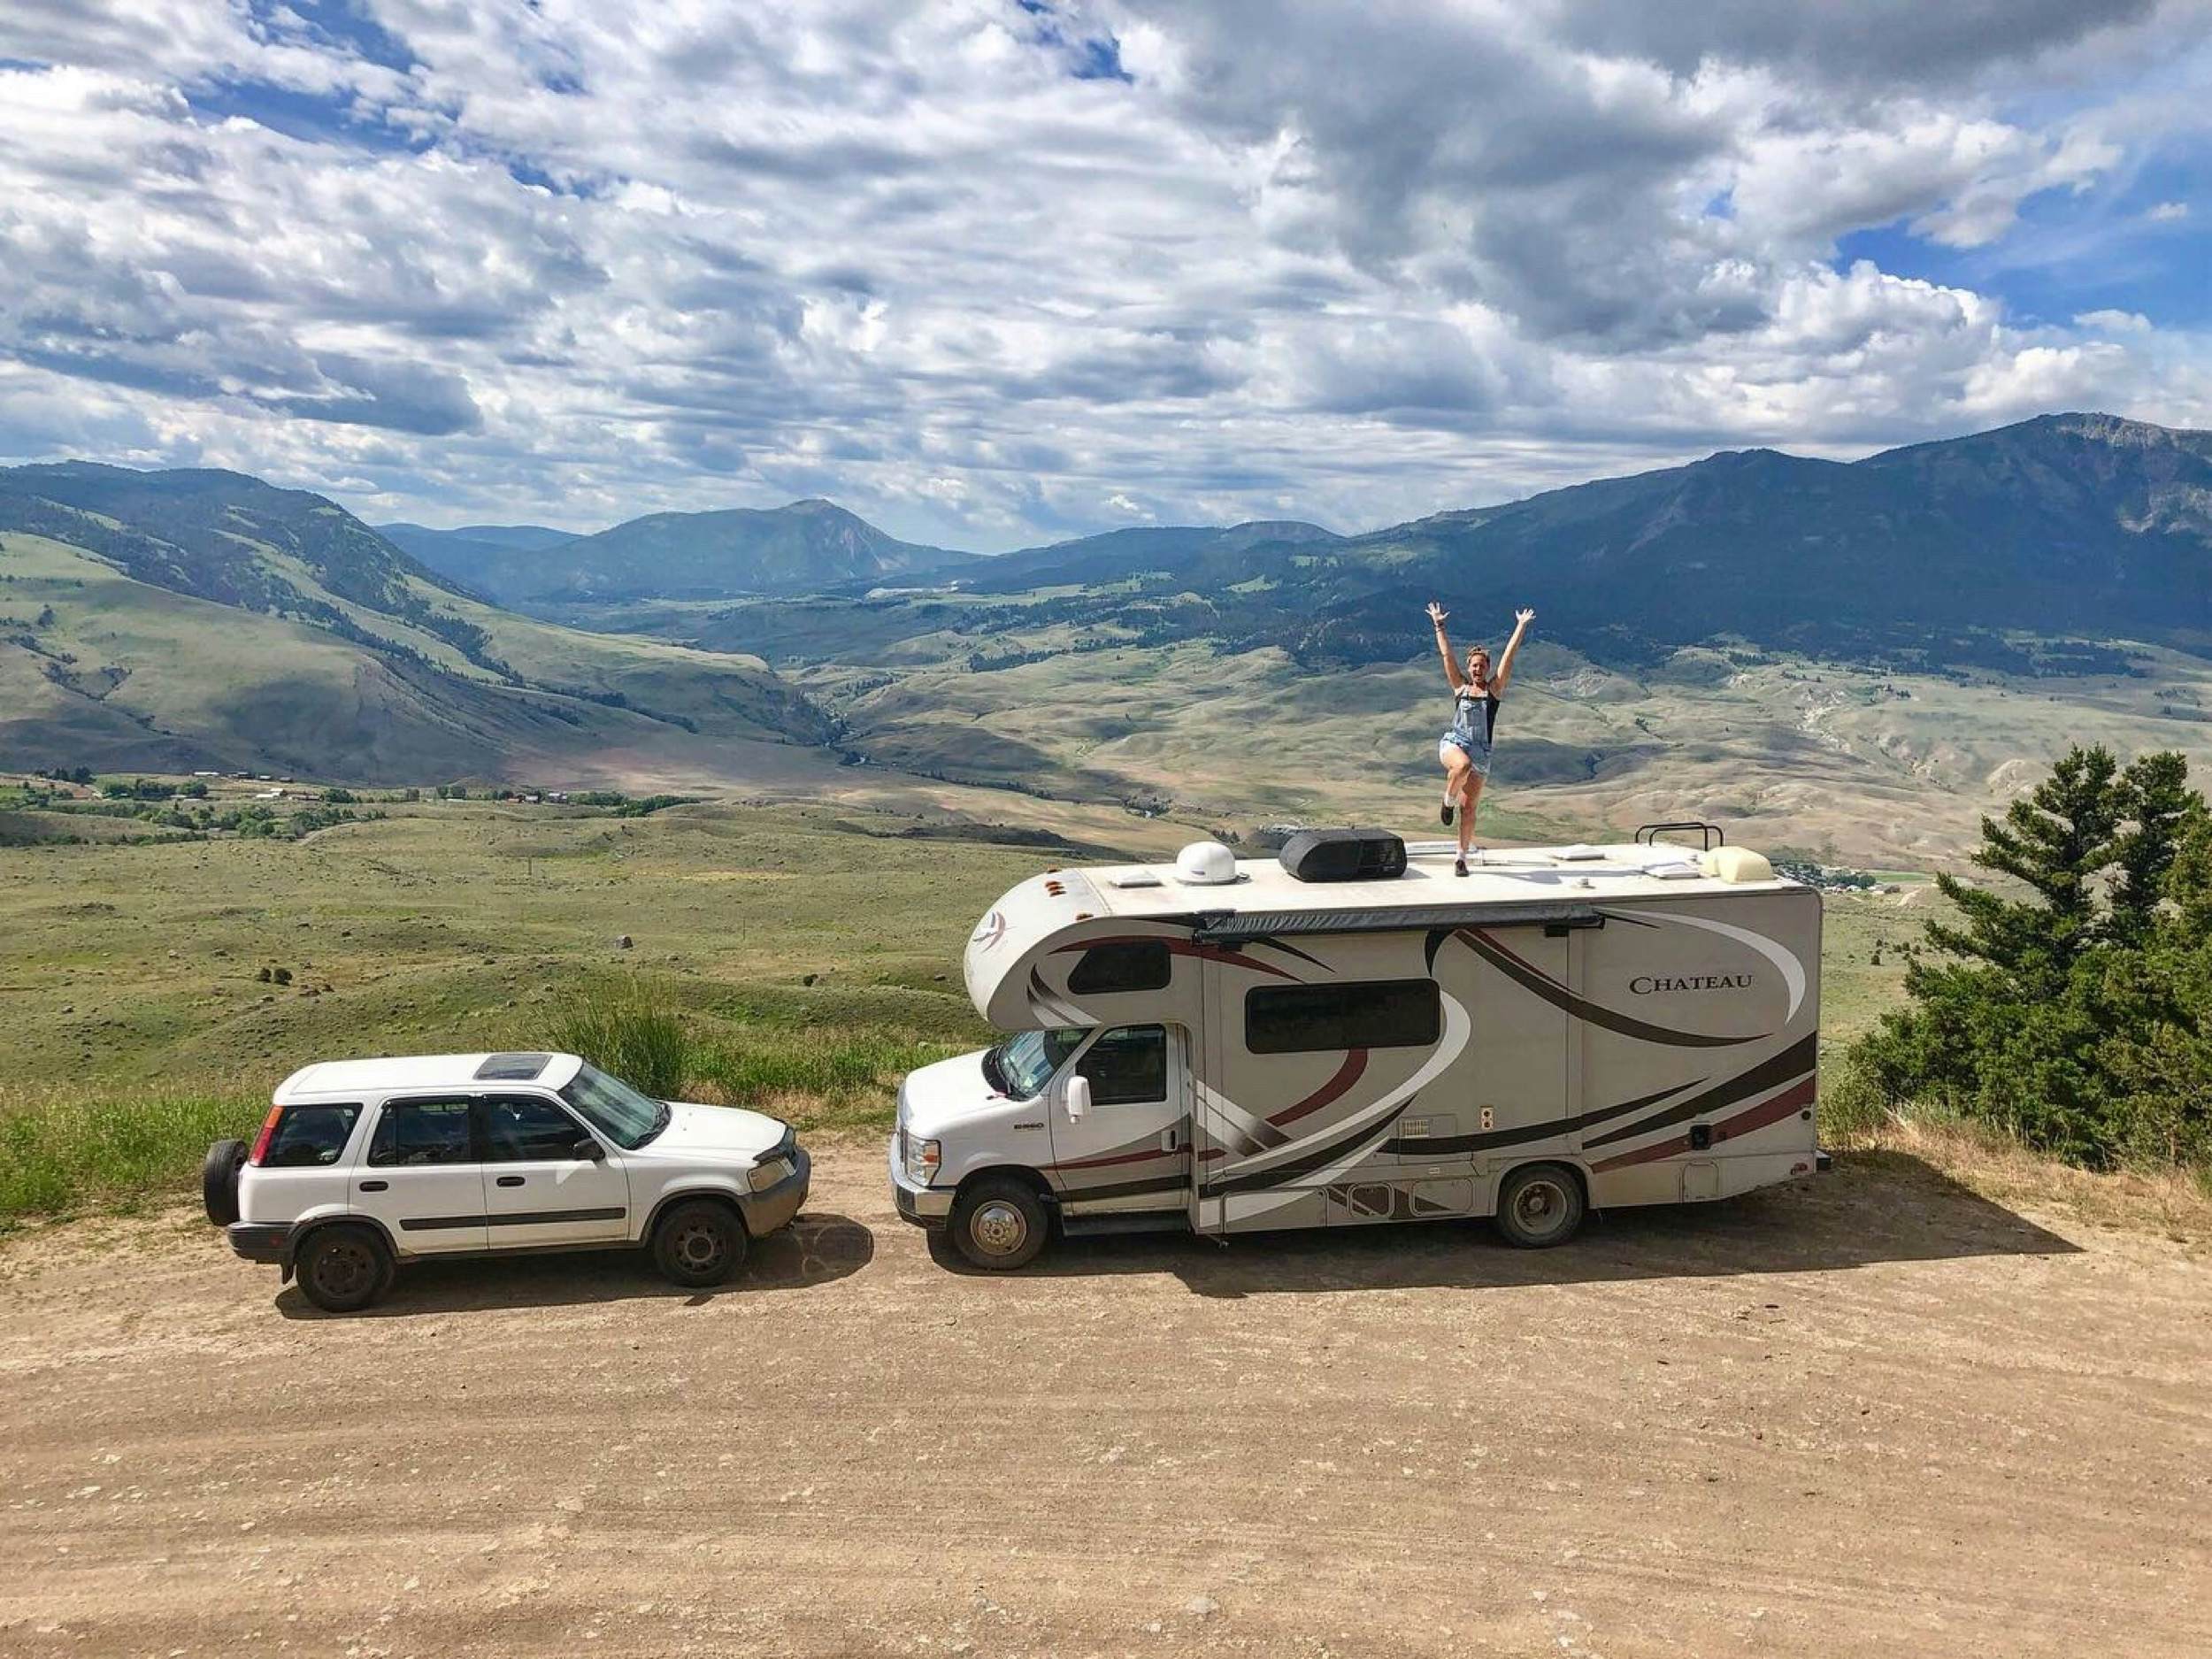 Singles for rv partners looking Camping Friends